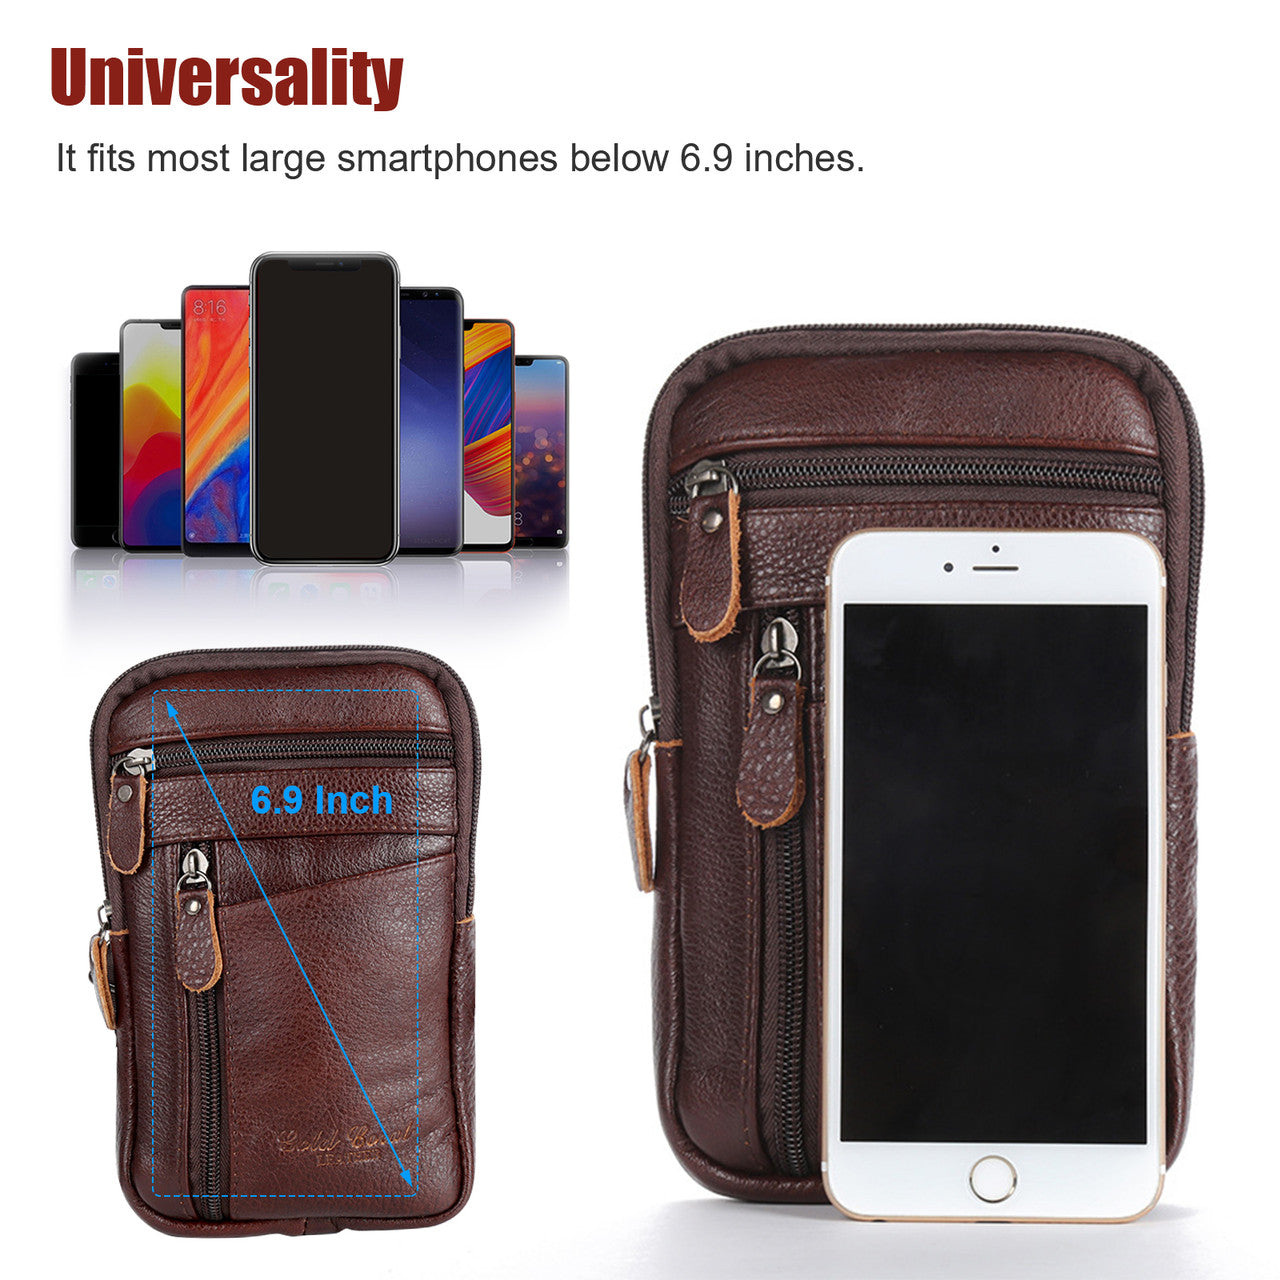 Men Leather Fashion Crossbody Pouch Belt Bag for Travel and Everyday Life